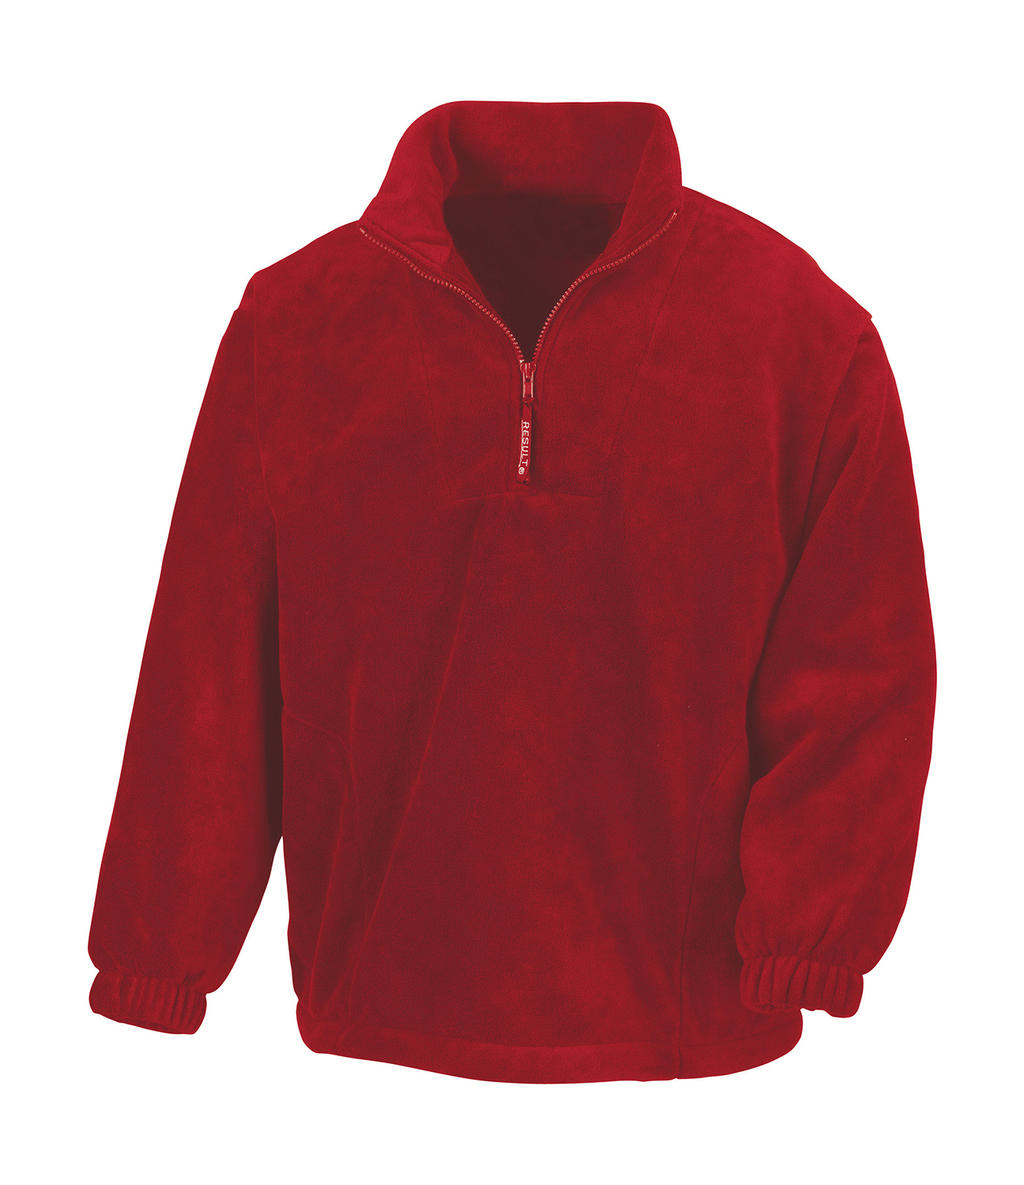  Polartherm? Top in Farbe Red